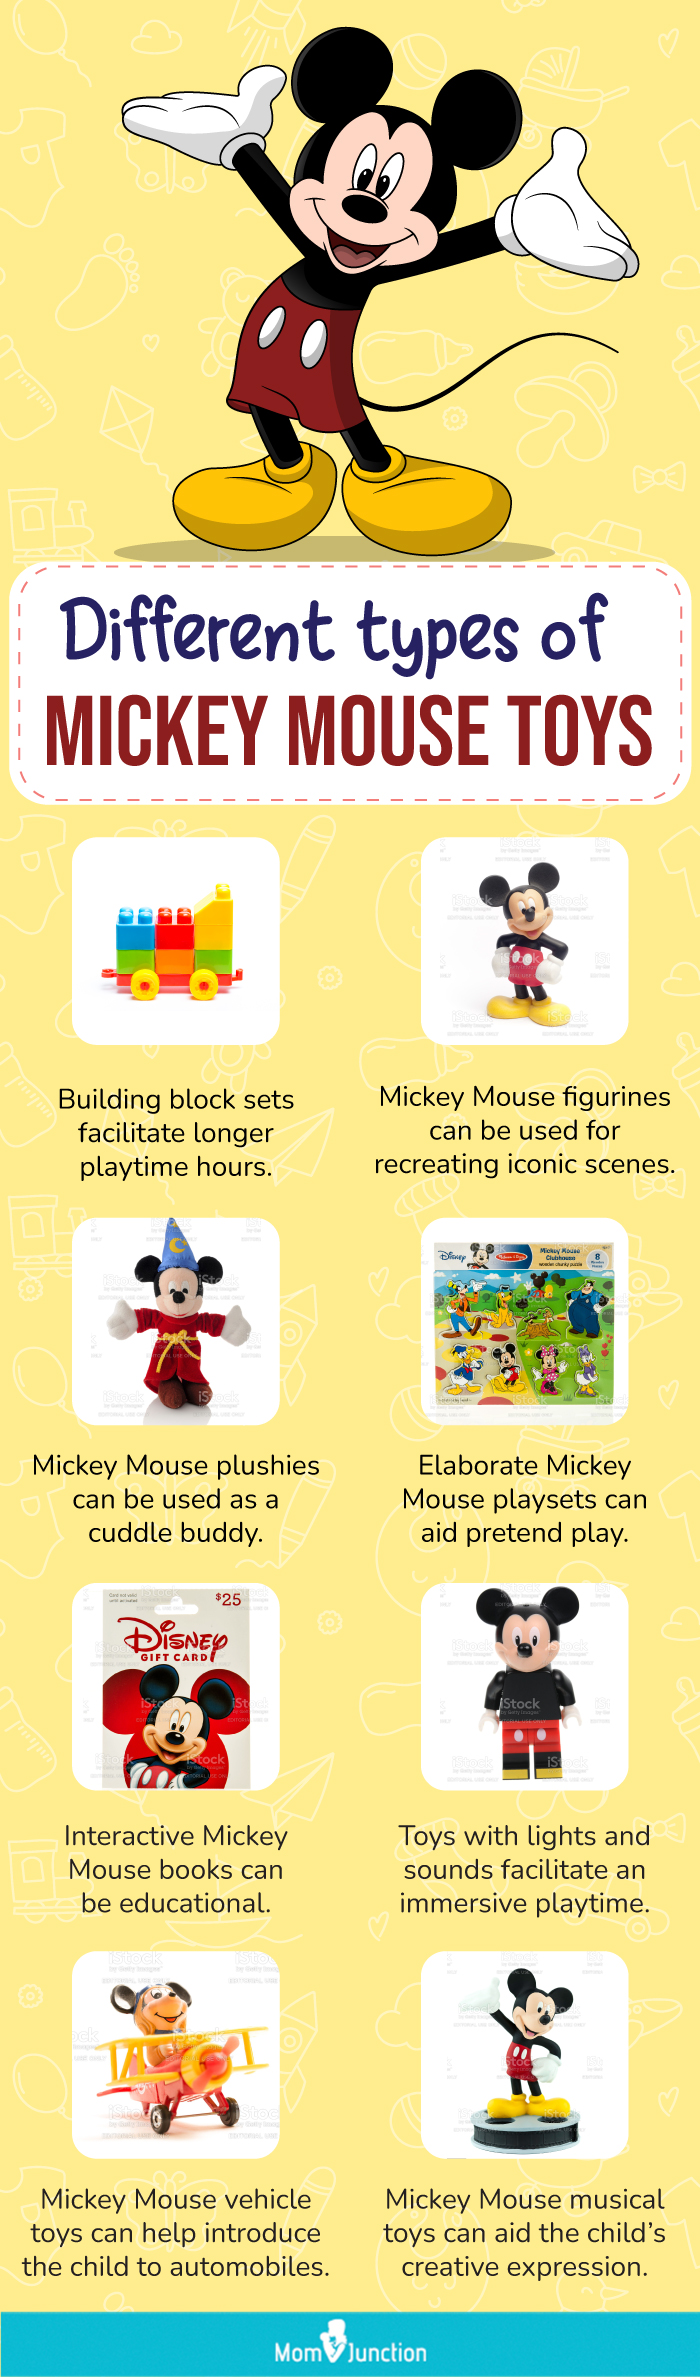 Different Types Of Mickey Mouse Toys (infographic)